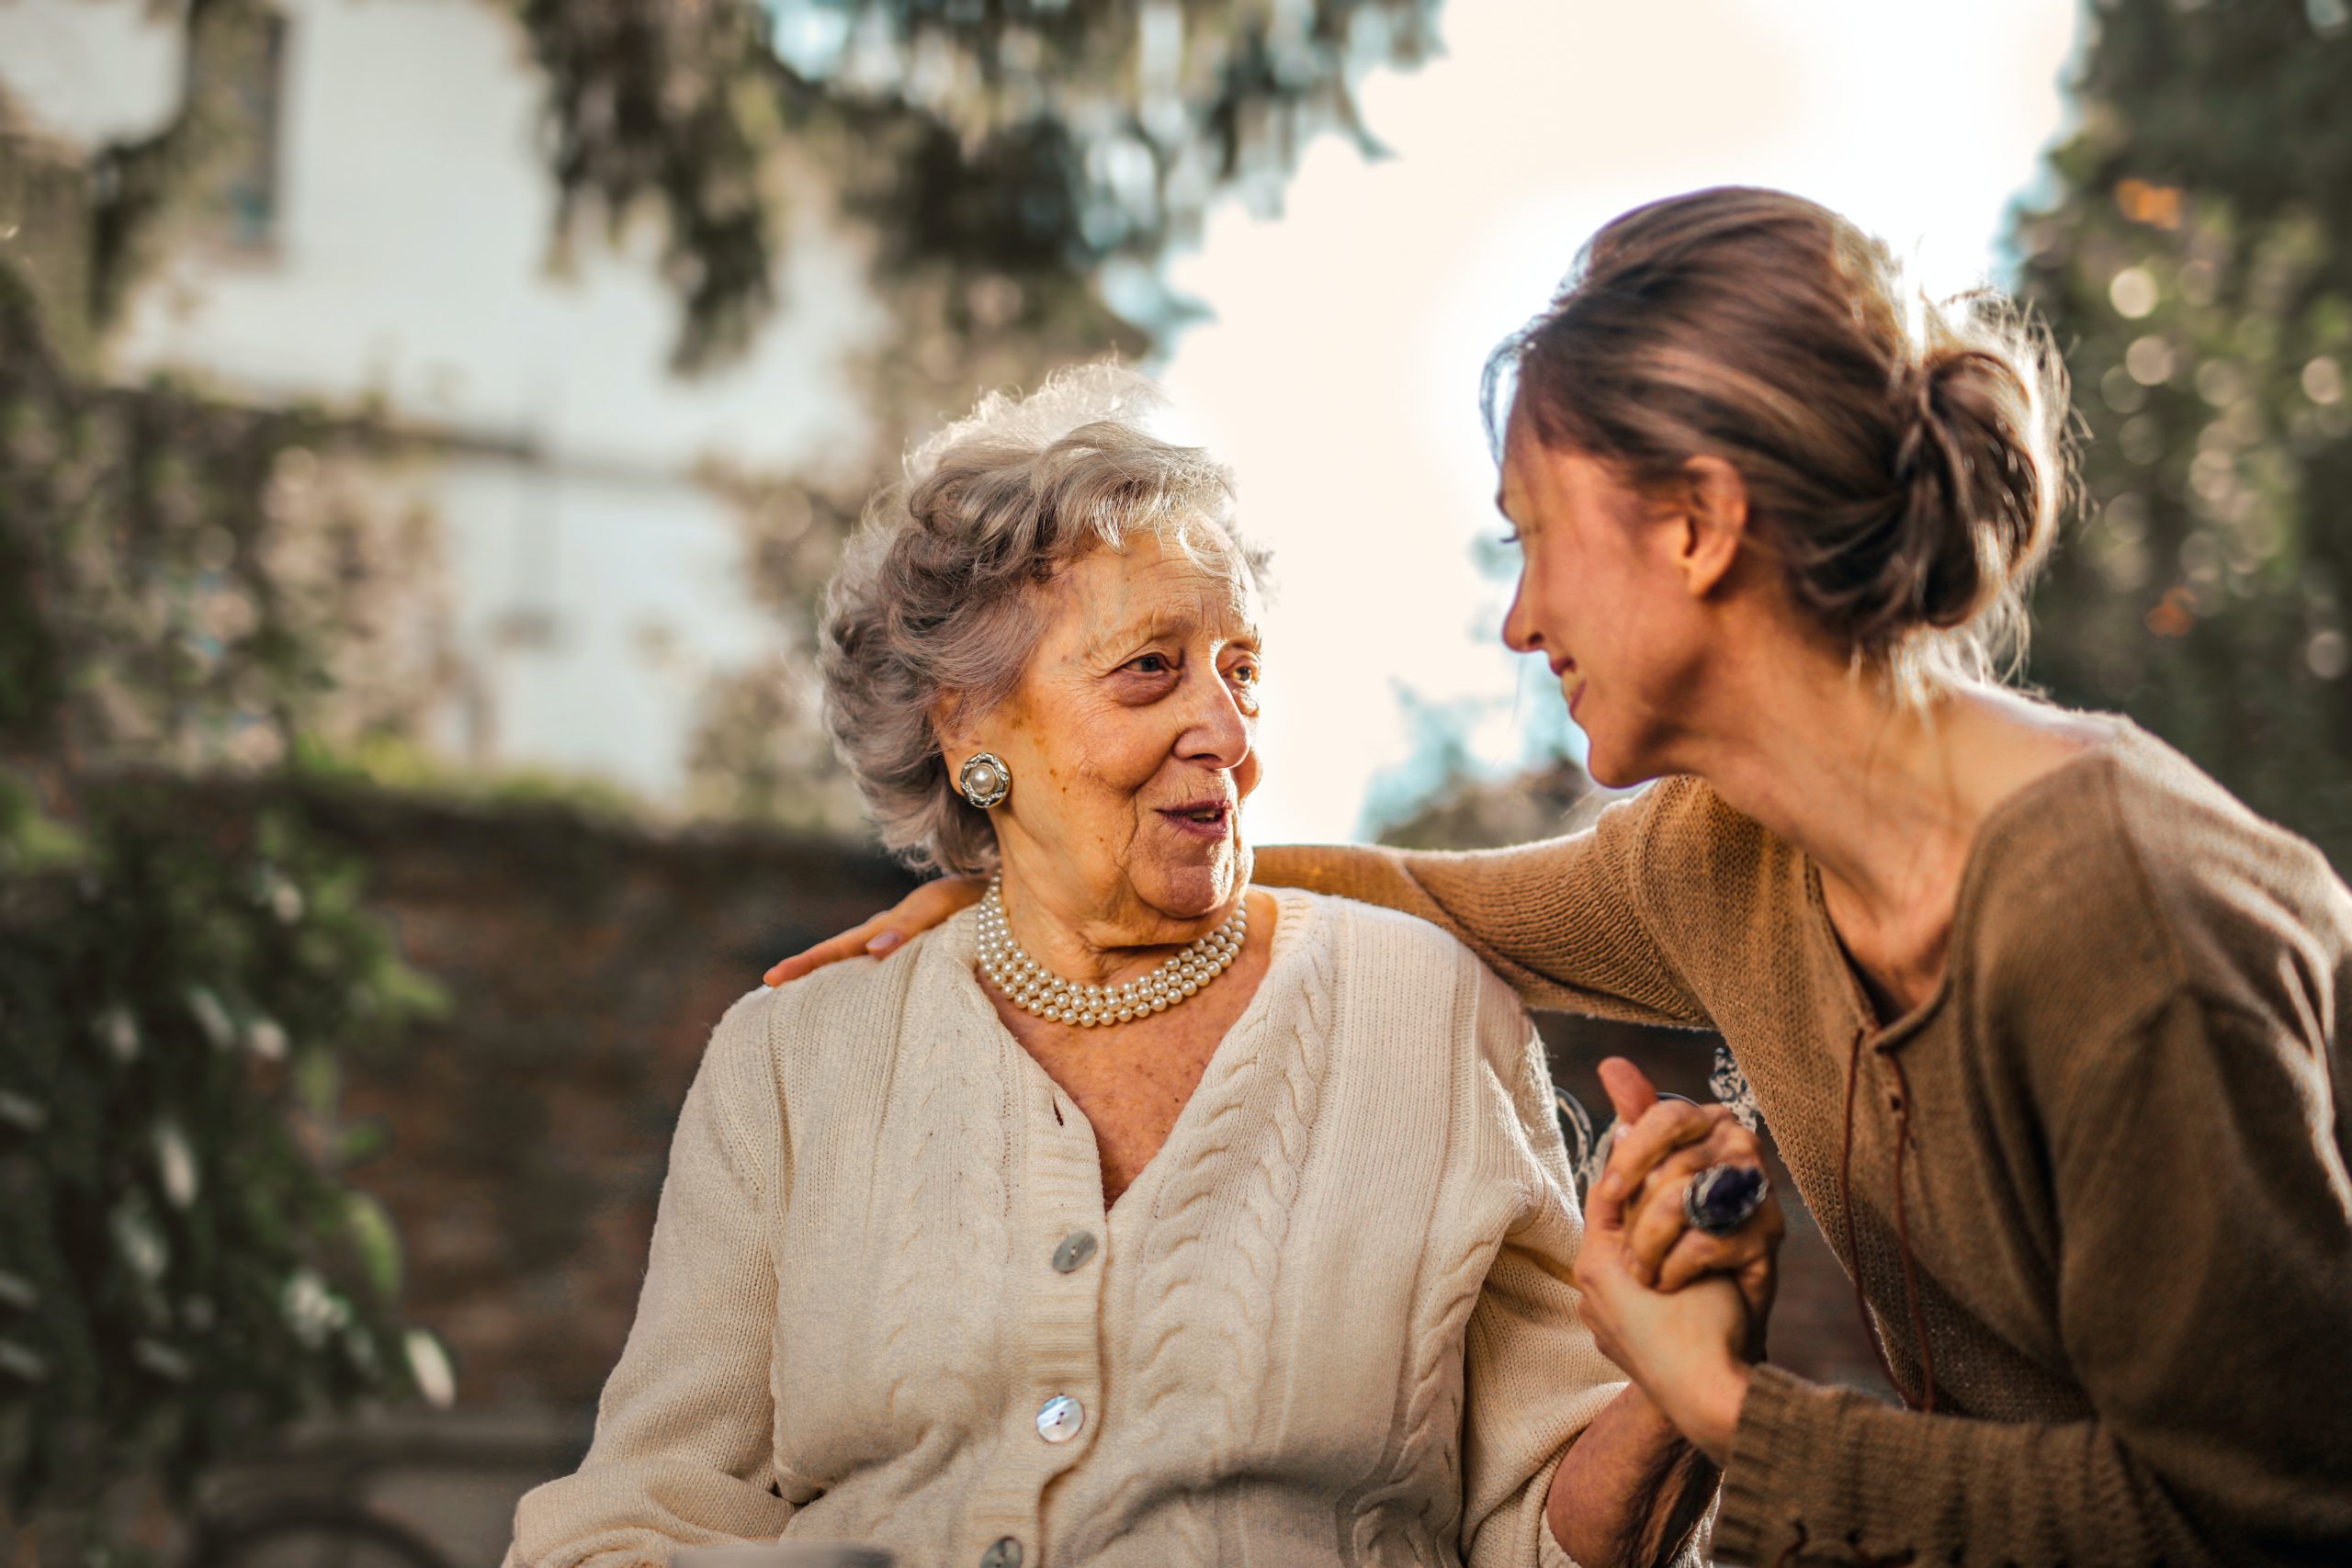 What Is A Caregiver?